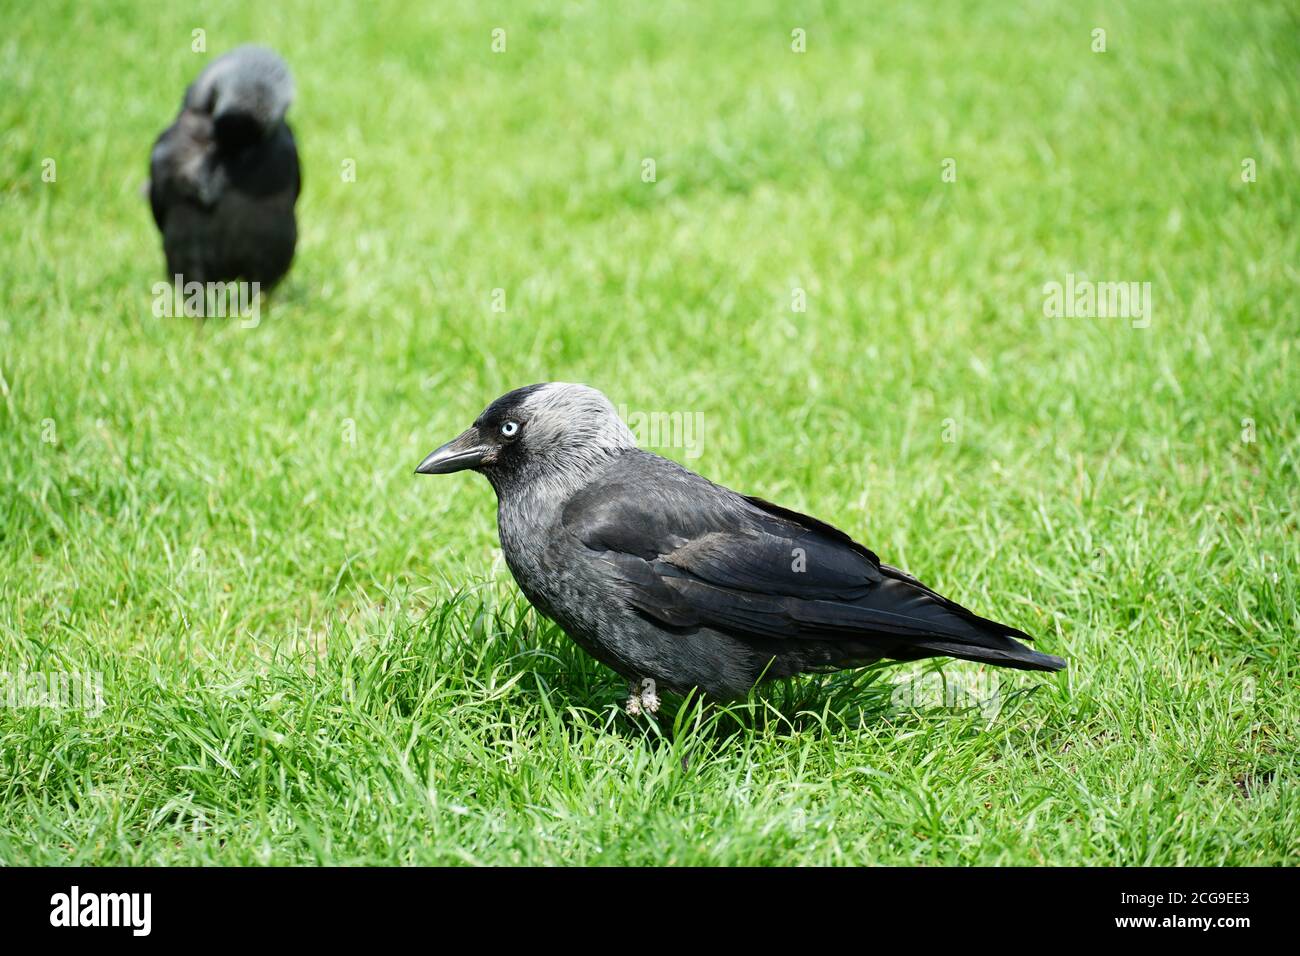 A very young raven, called Corvus in Latin, with plumage of several grey shades standing on a bright green lawn in close upl view. Stock Photo